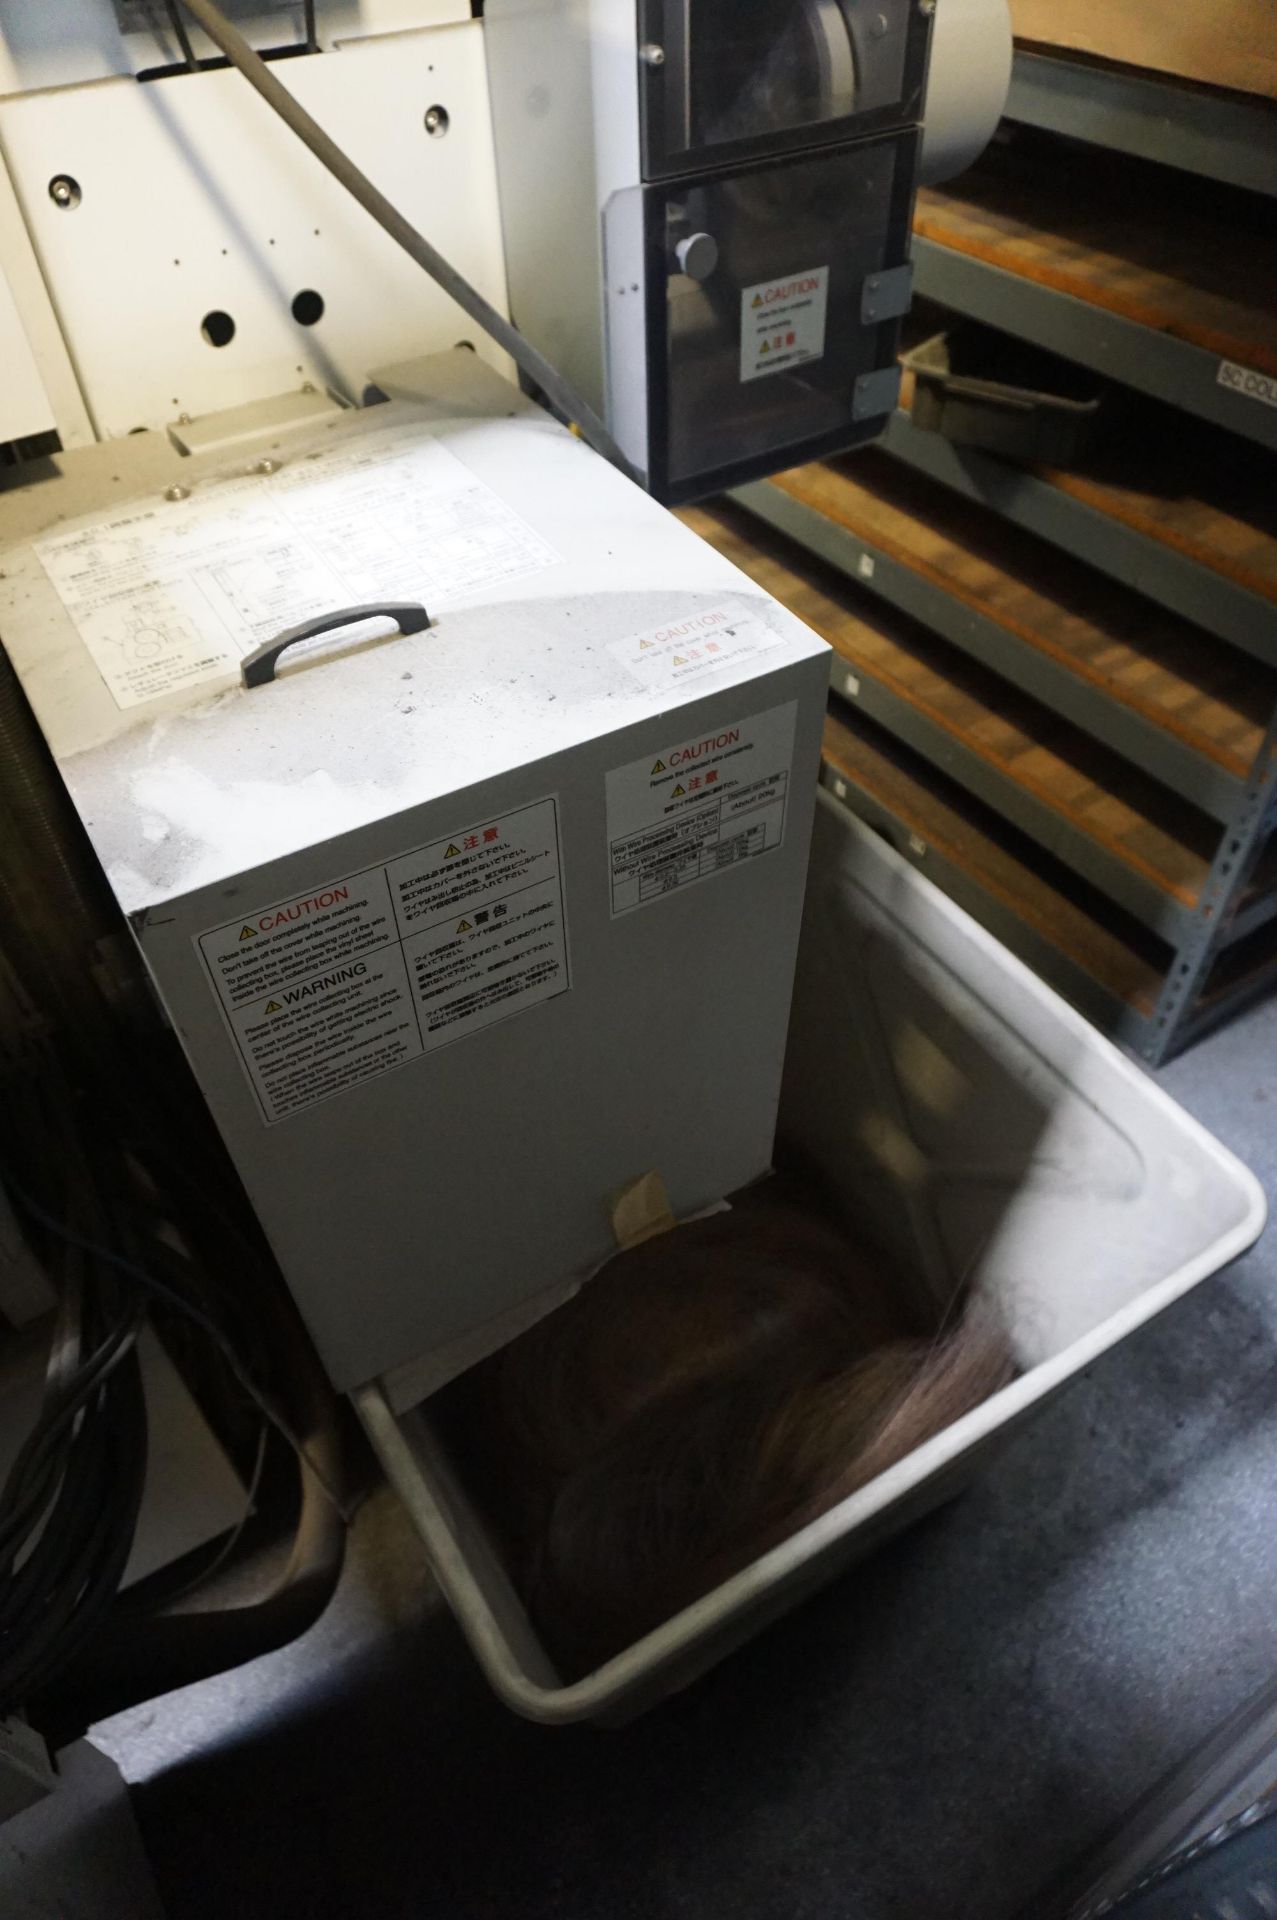 2007 MITSUBISHI MD+PROII WIRE ELECTRICAL DISCHARGE MACHINE MODEL BA8, WEIGHT 1800KG, S/N 50B8V201, - Image 8 of 10